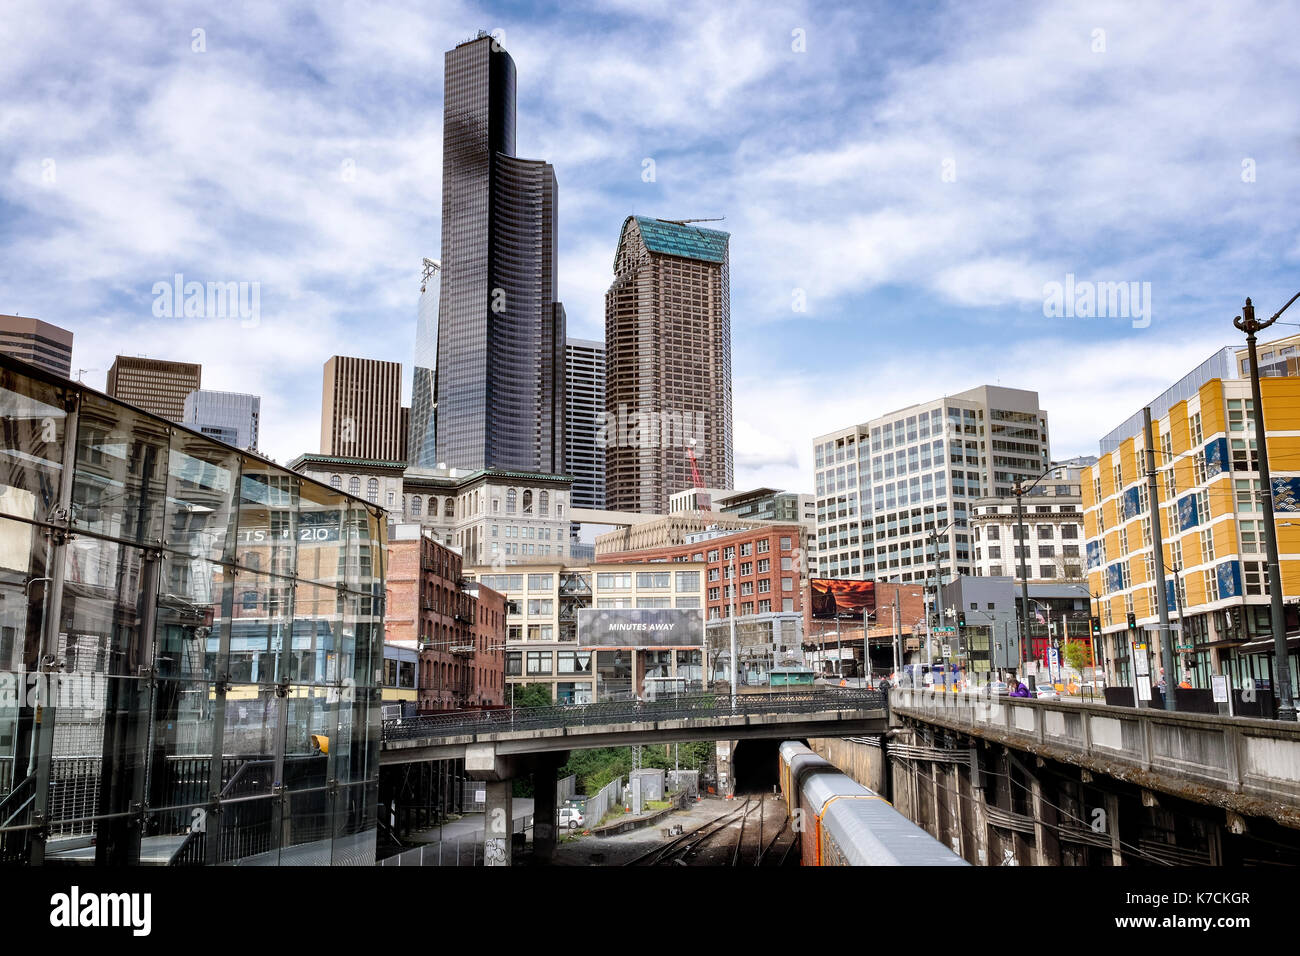 SEATTLE Cityscape showing skyline and a train entering the Great Northern Tunnel, built 1905, a one-mile double tracked railway tunnel Stock Photo